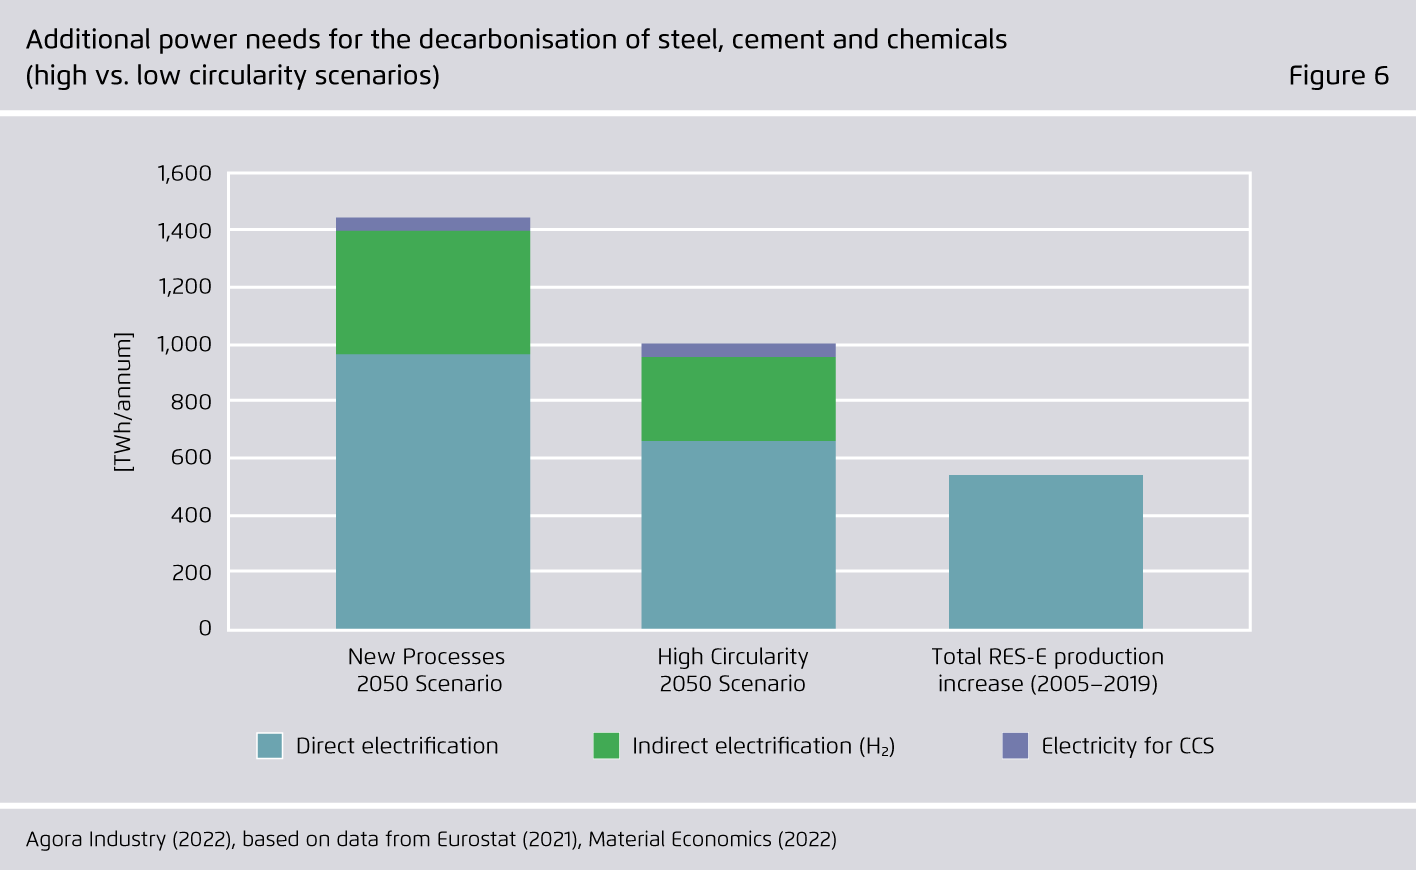 Preview for Additional power needs for the decarbonisation of steel, cement and chemicals (high vs. low circularity scenarios)